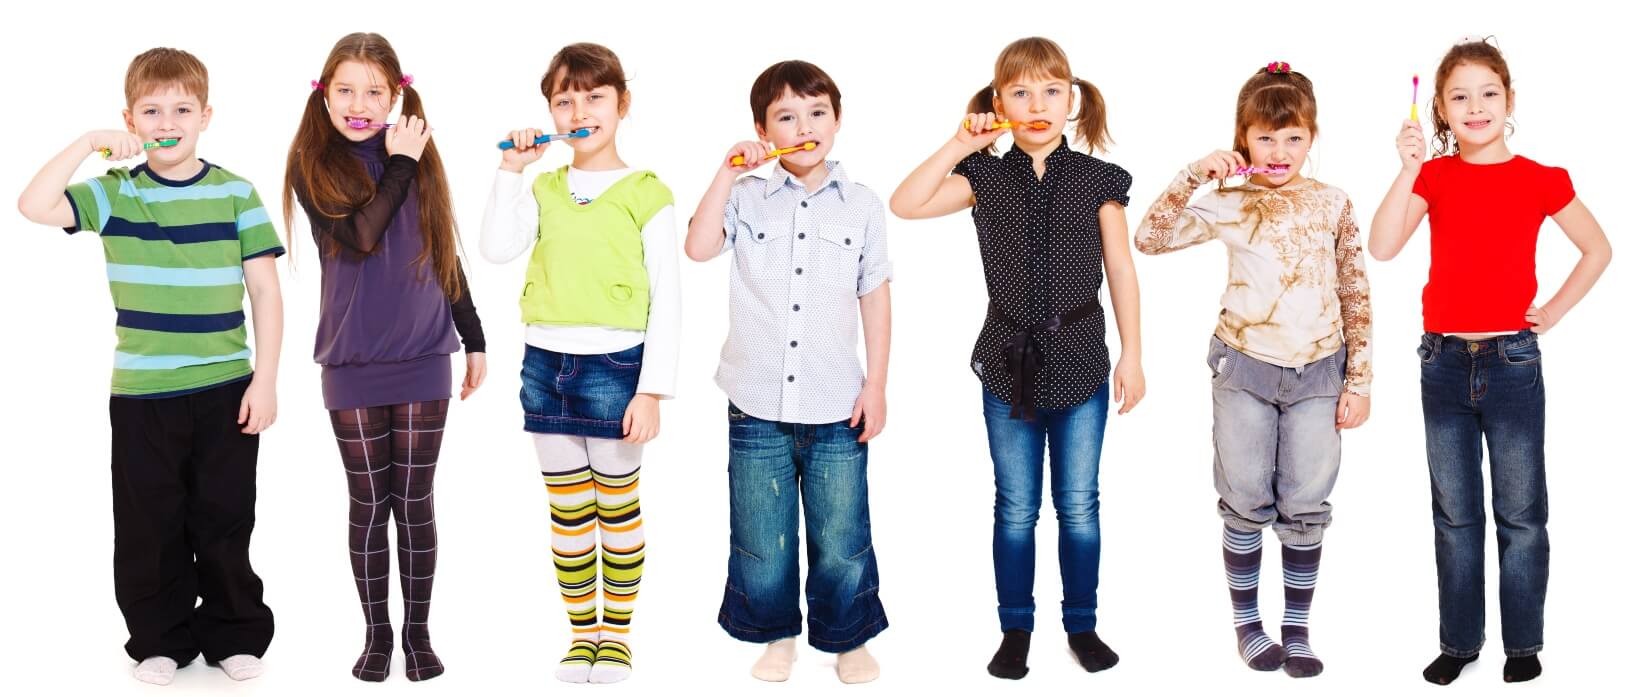 7 children with toothbrushes